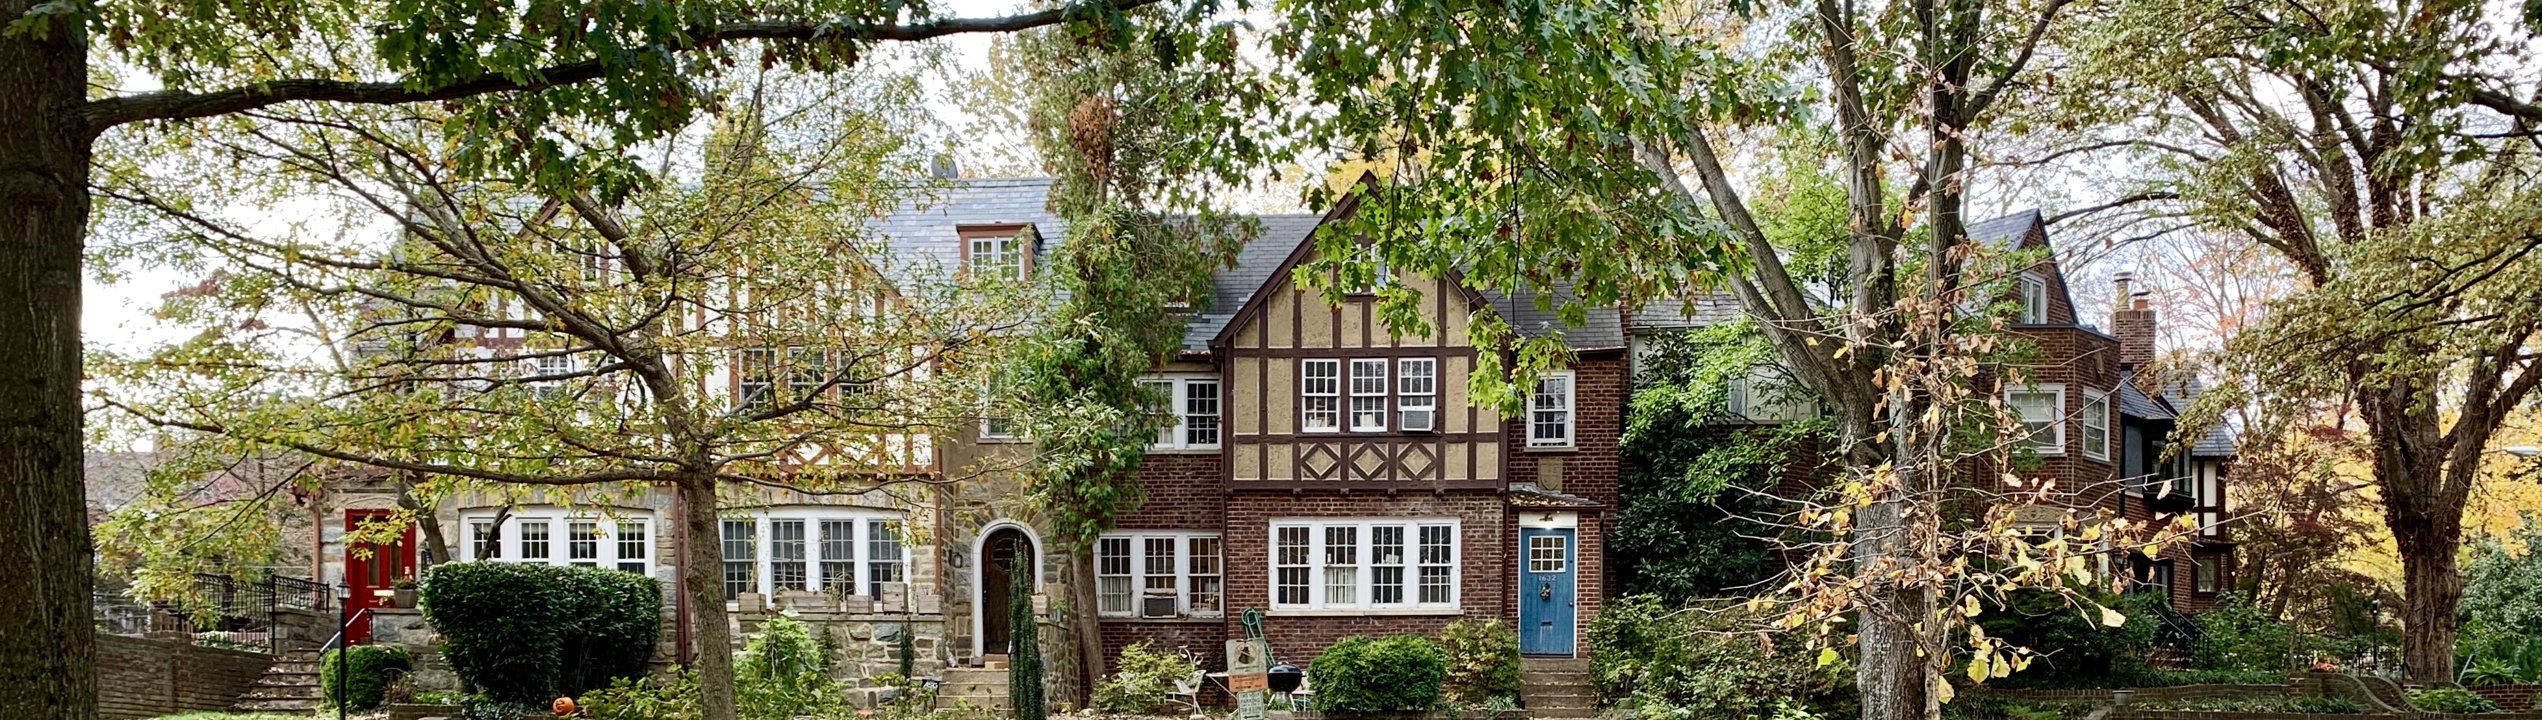 Tudor Homes For Sale In Washington, DC. Glover Rd In Foxhall Village. Artyom Shmatko Luxury Real Estate Agent 